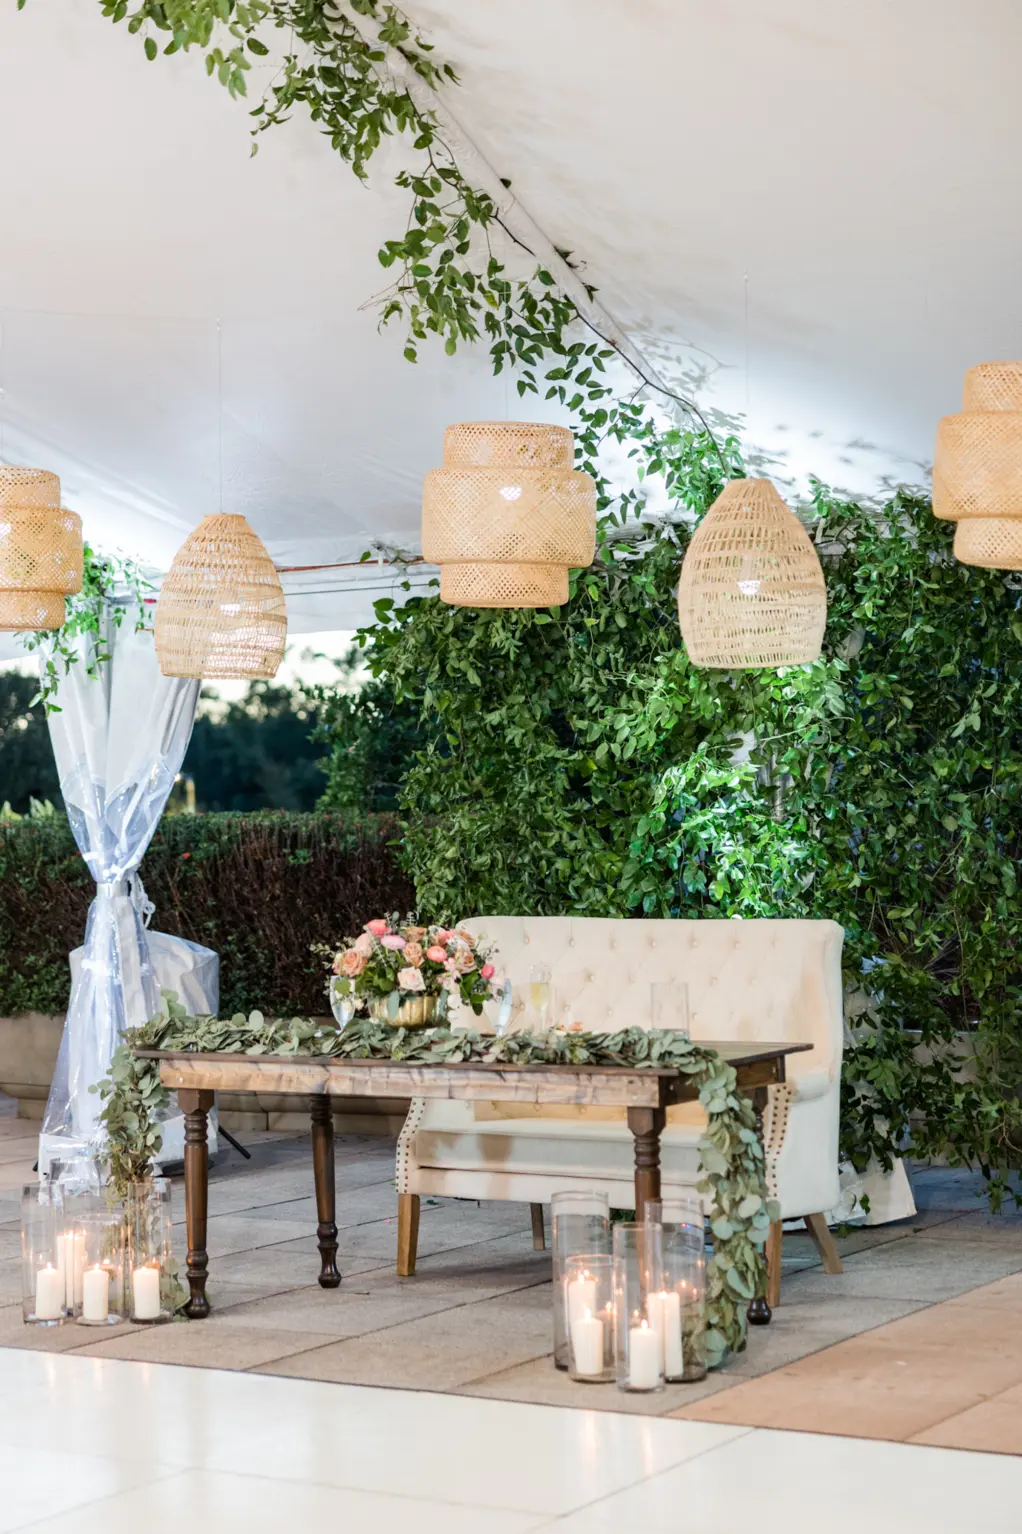 Wedding Reception Sweetheart Table with Tufted Loveseat, Wooden Farm Table, Greenery Garland, Boho Chandeliers, and Floor Candle Decor Inspiration | Tampa Bay Kate Ryan Event Rentals